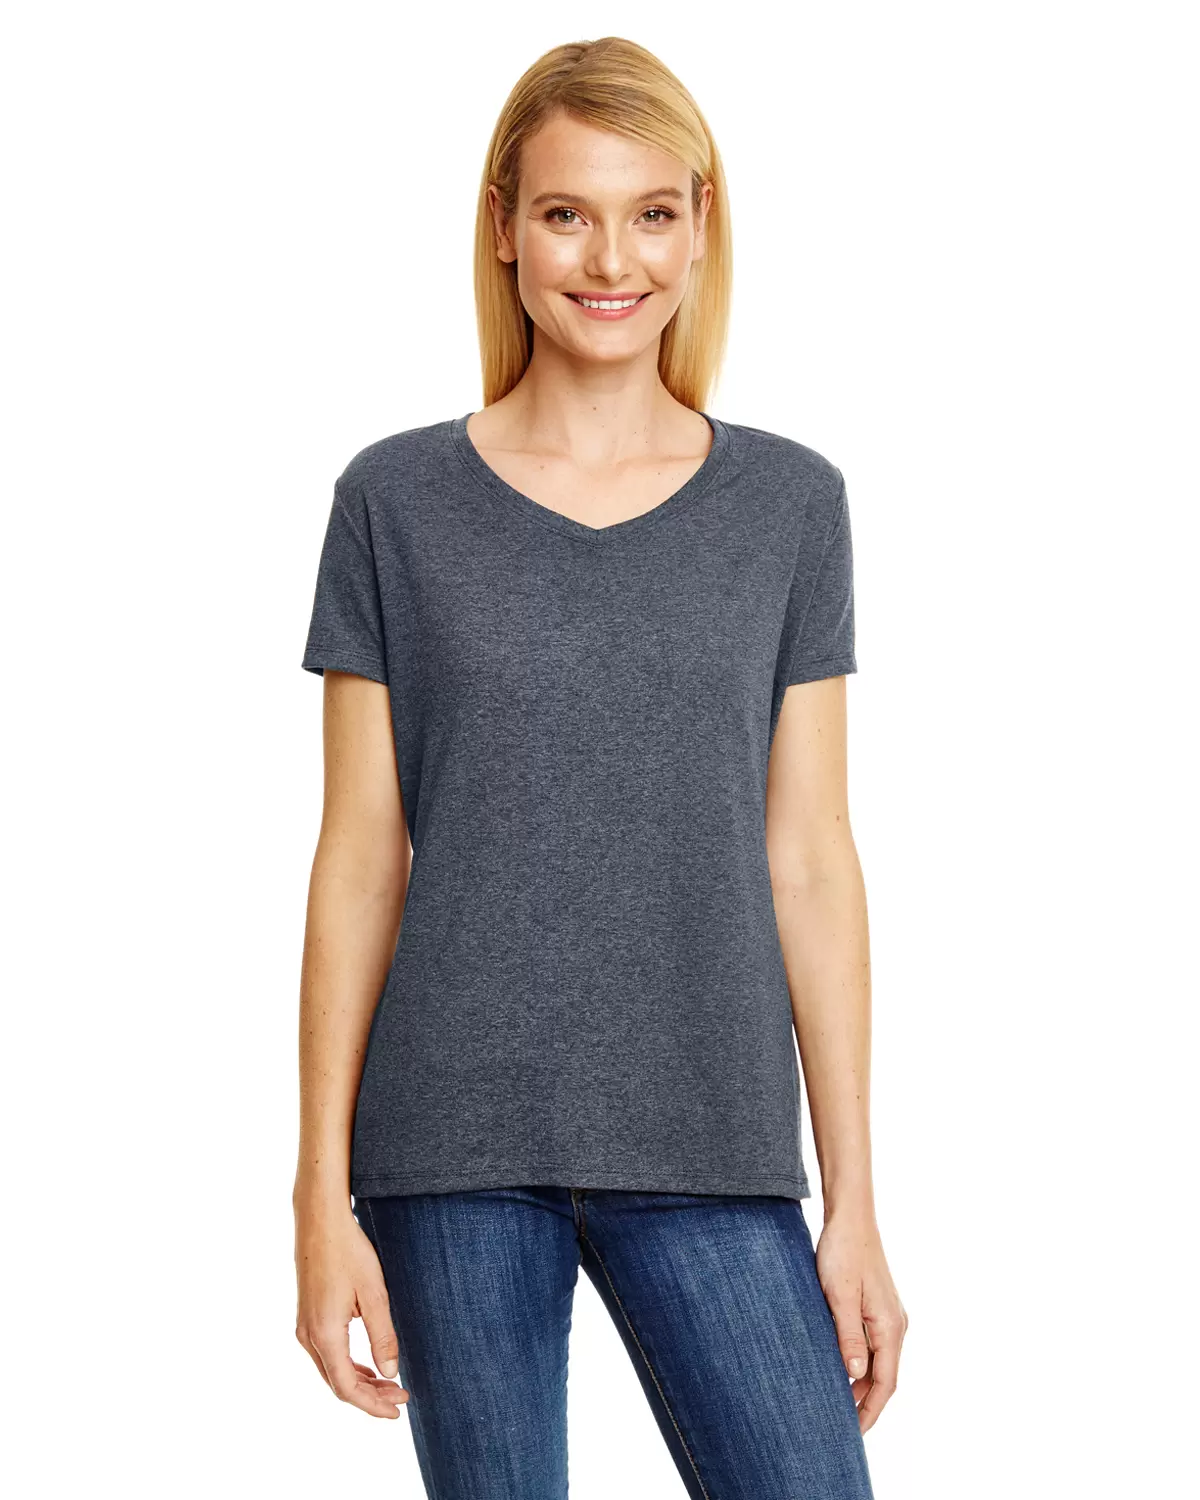 Hanes 42VT Women's V Neck Triblend T Shirts with Fresh IQ - From $4.70